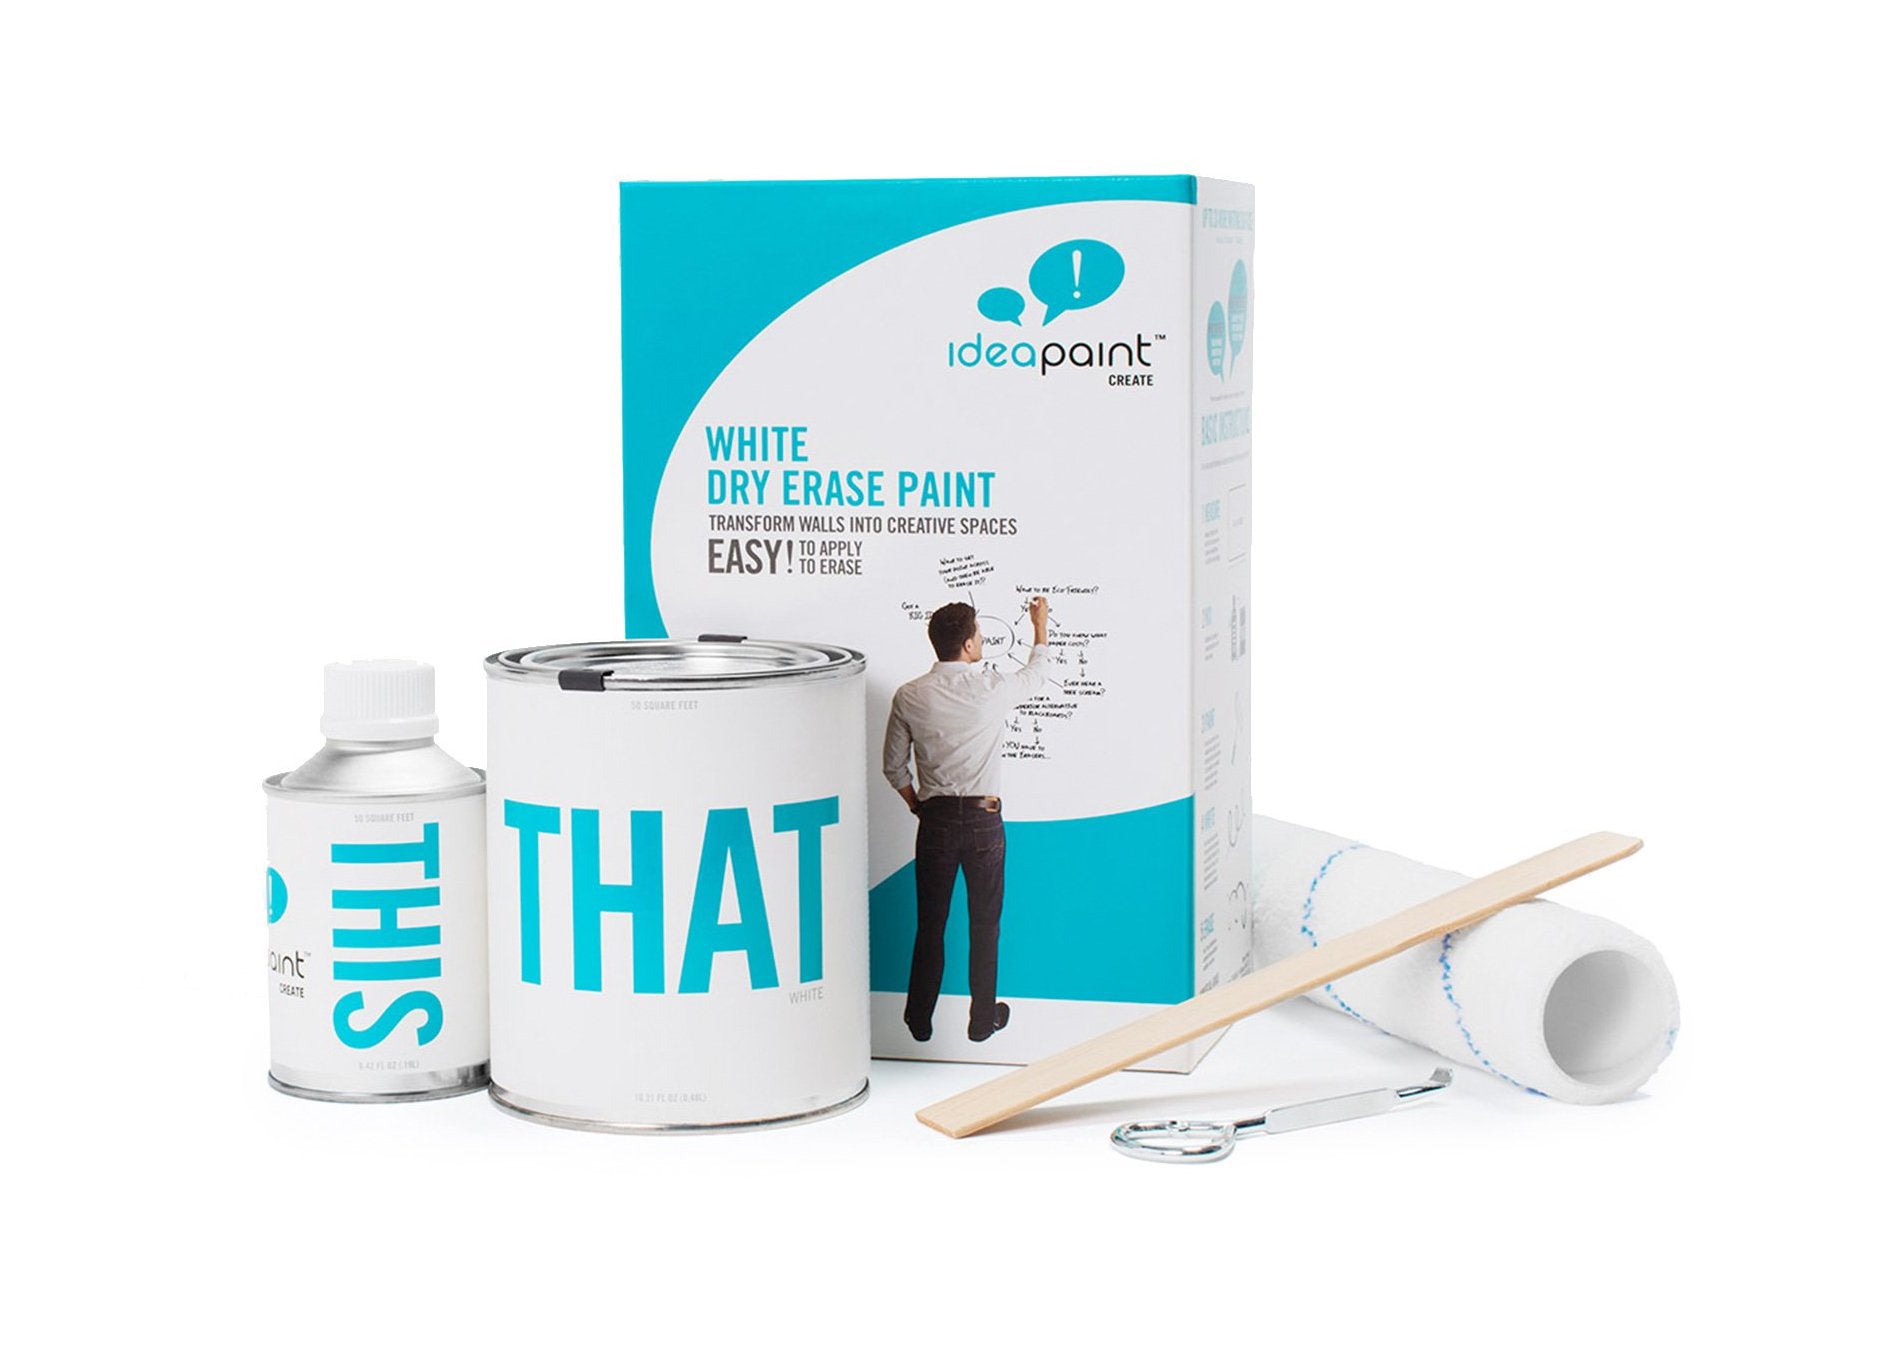 Whiteboard Paint - 6sqm coverage